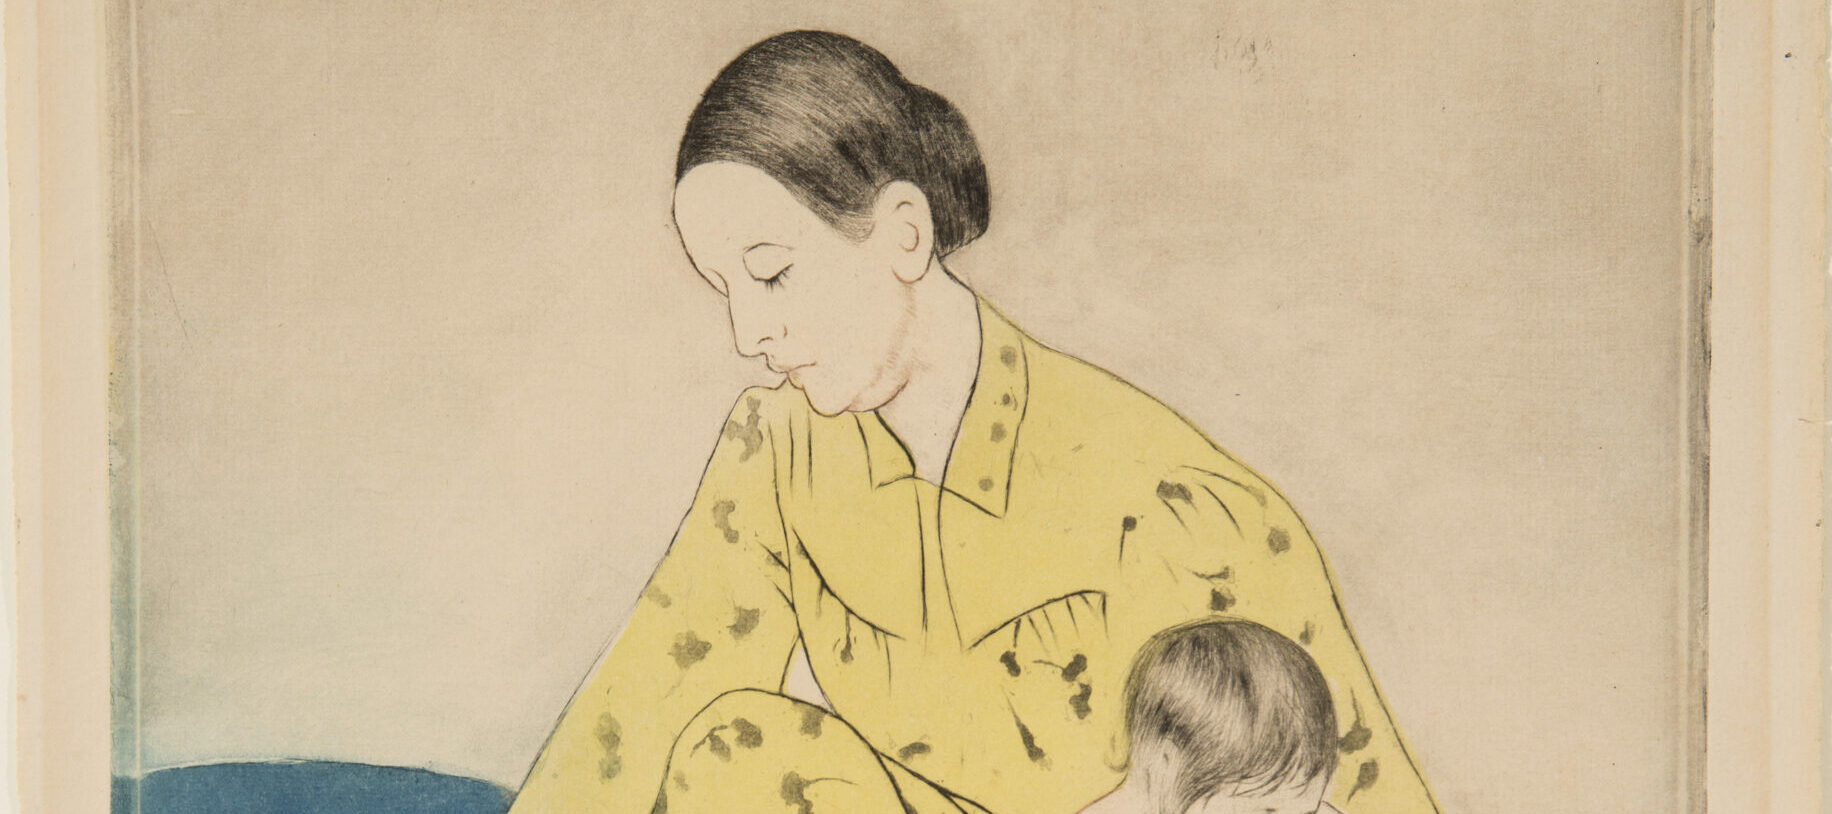 A print shows a dark-haired, light-skinned woman wearing a yellow dress and kneeling near a blue tub. Her right hand tests the water, and her left gently restrains a naked child who faces the opposite direction as if squirming away. Minimal shading flattens the space they occupy.